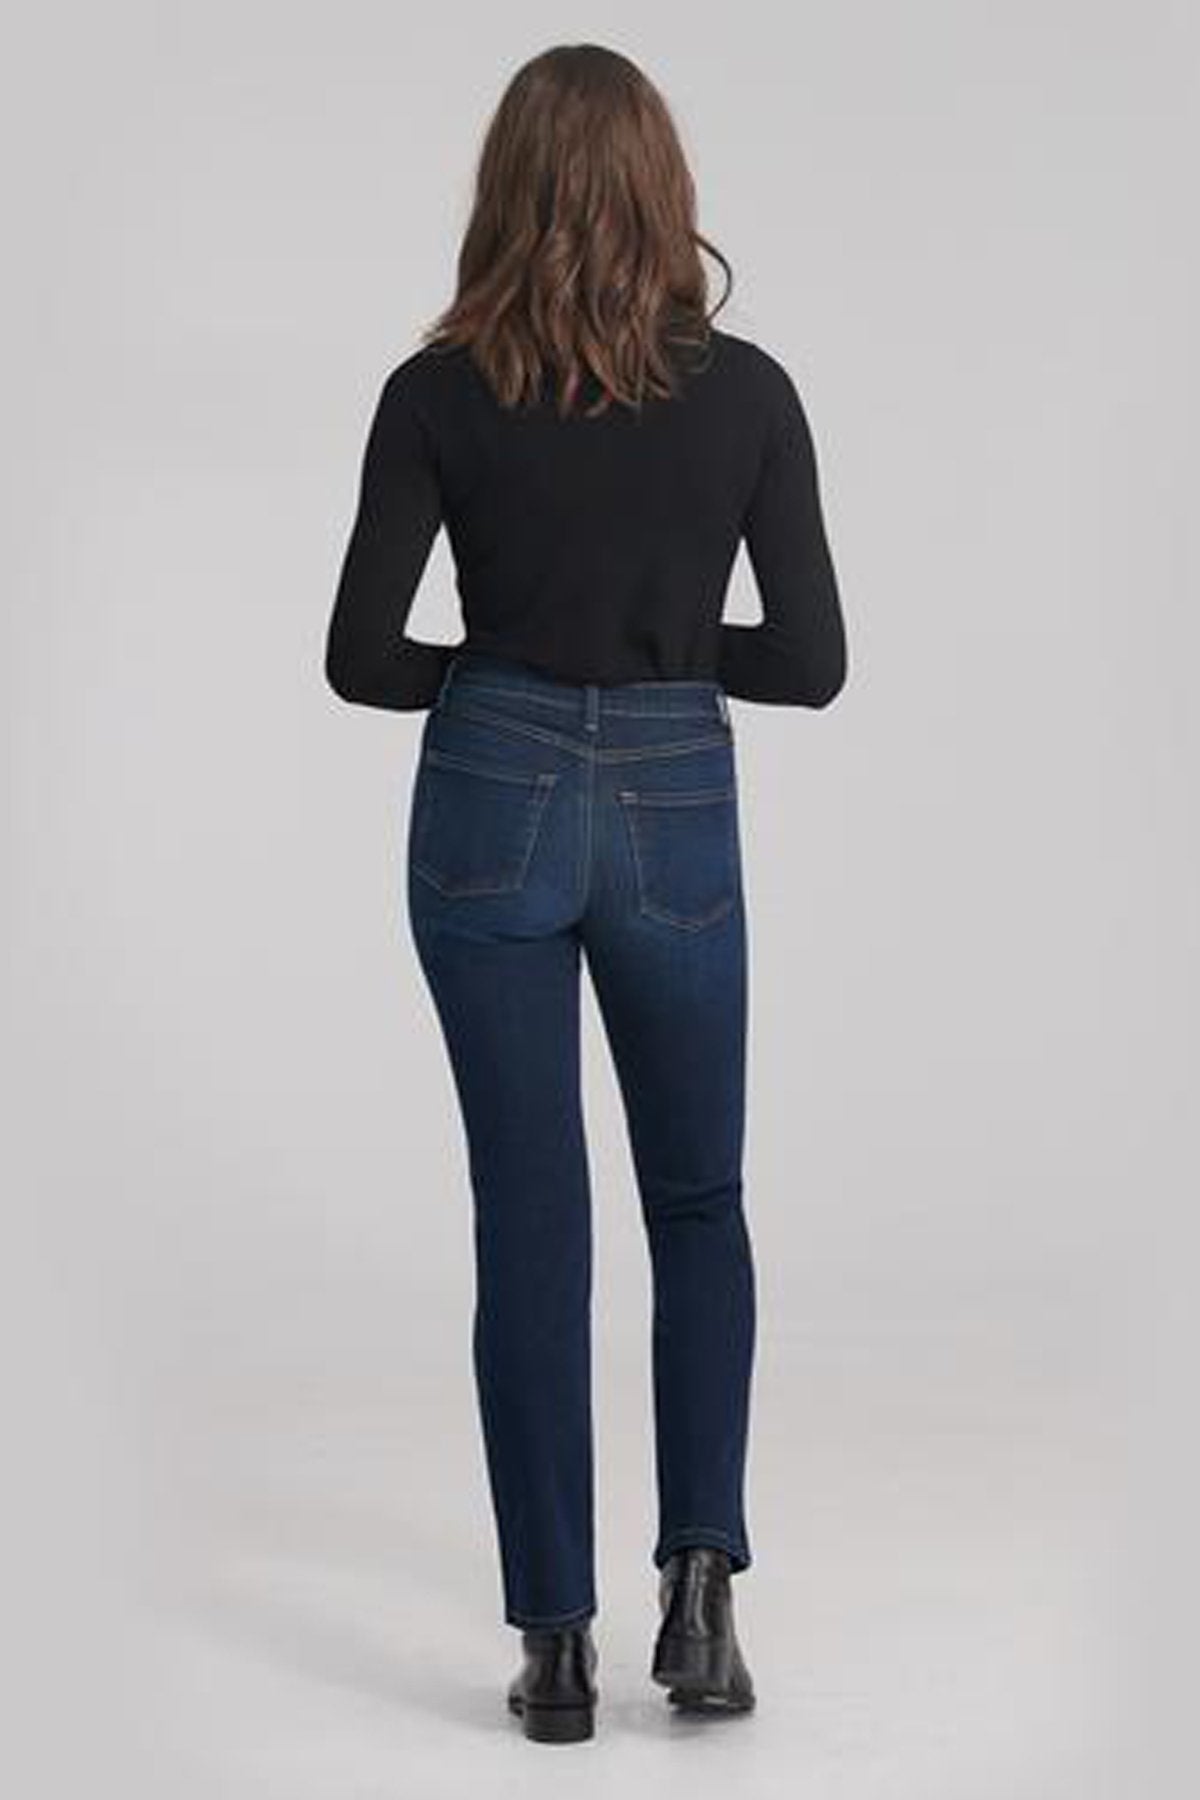 Classic Rise Straight Yoga Jean, Namaste, back view, classic rise waist, straight cut, 32 inch inseam, sizes 24-34, made in Canada